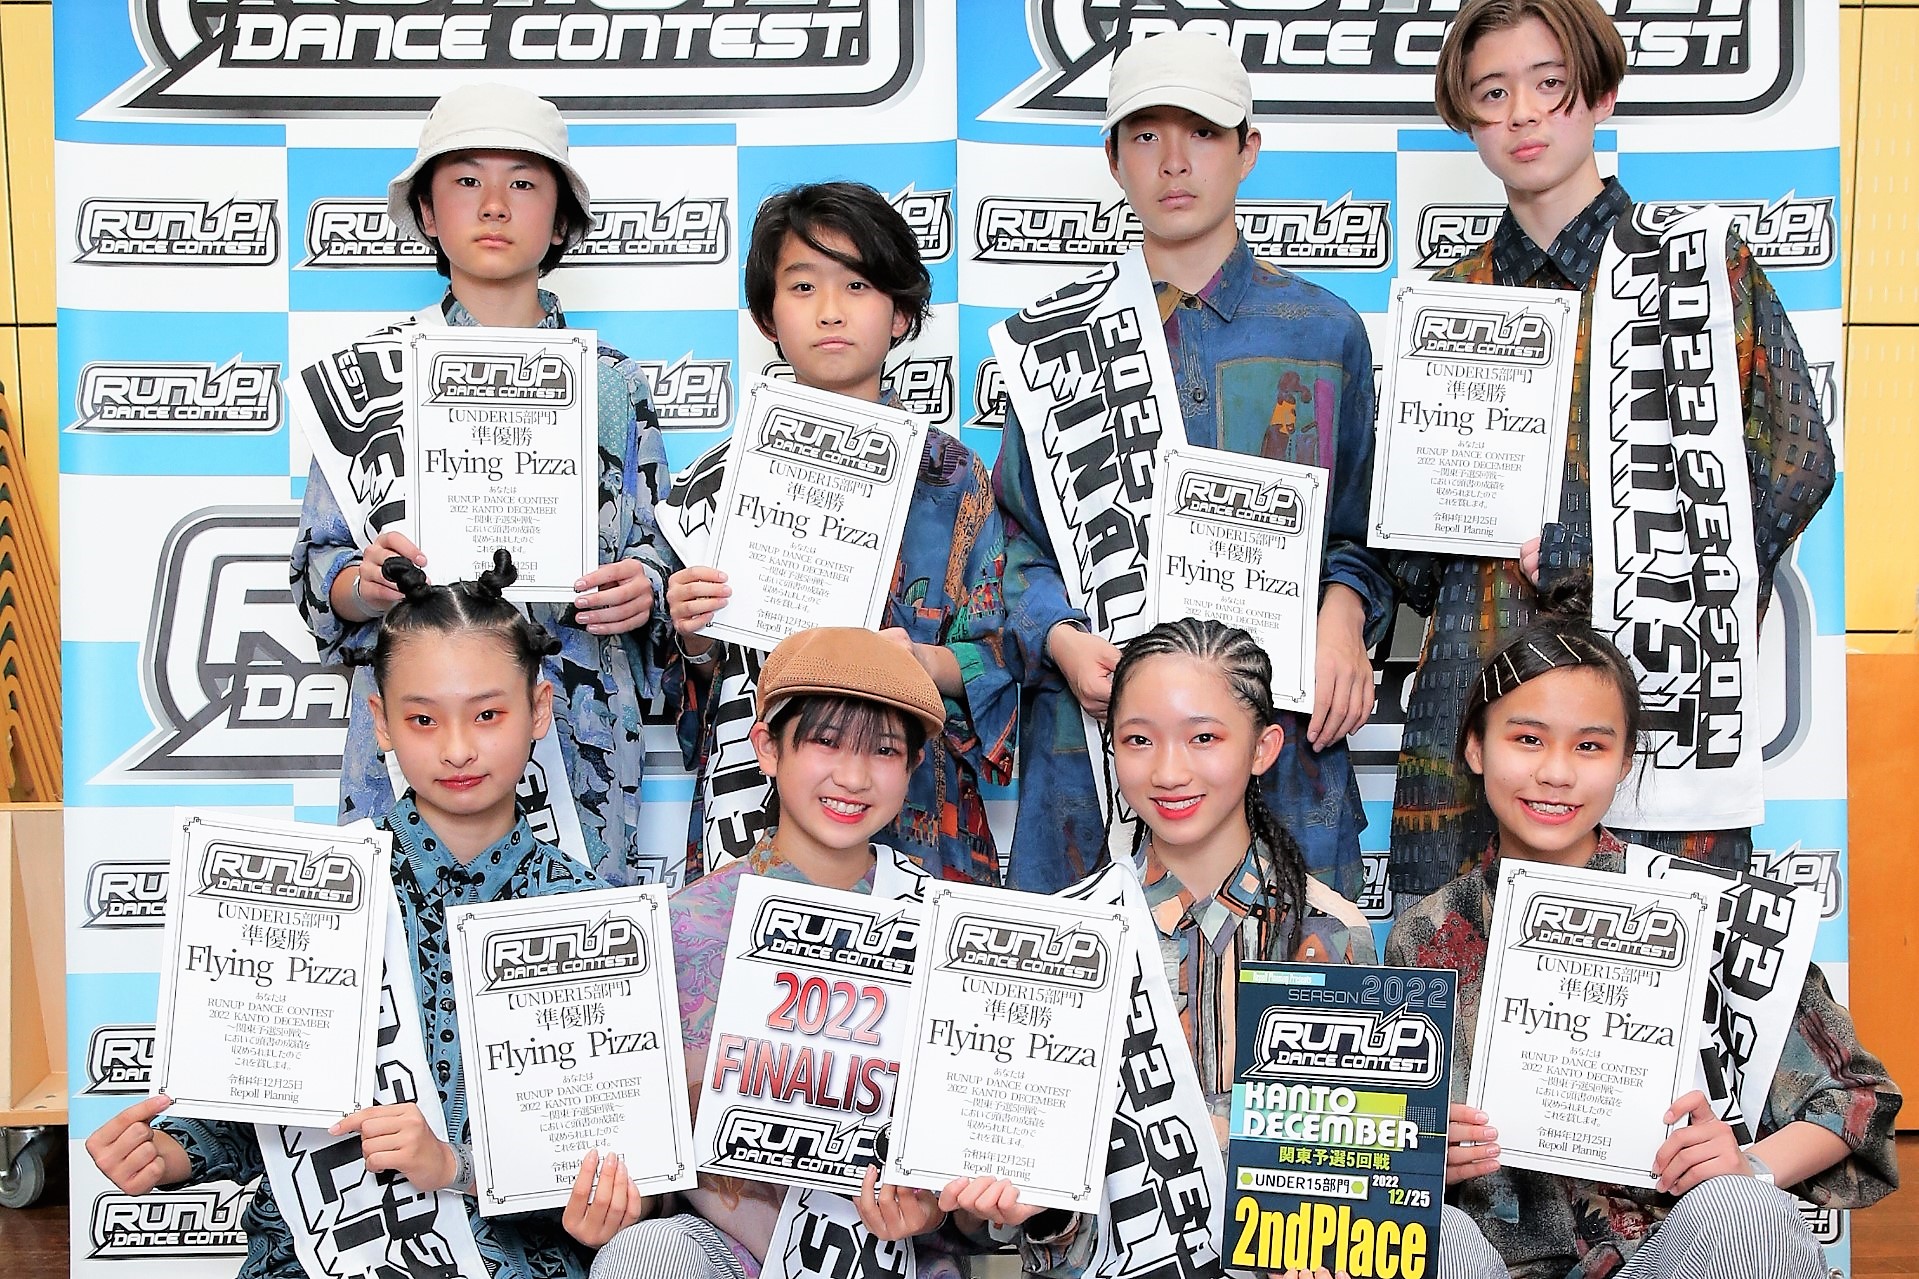 RUNUP 2022 KANTO DECEMBER UNDER15 準優勝 Flying Pizza